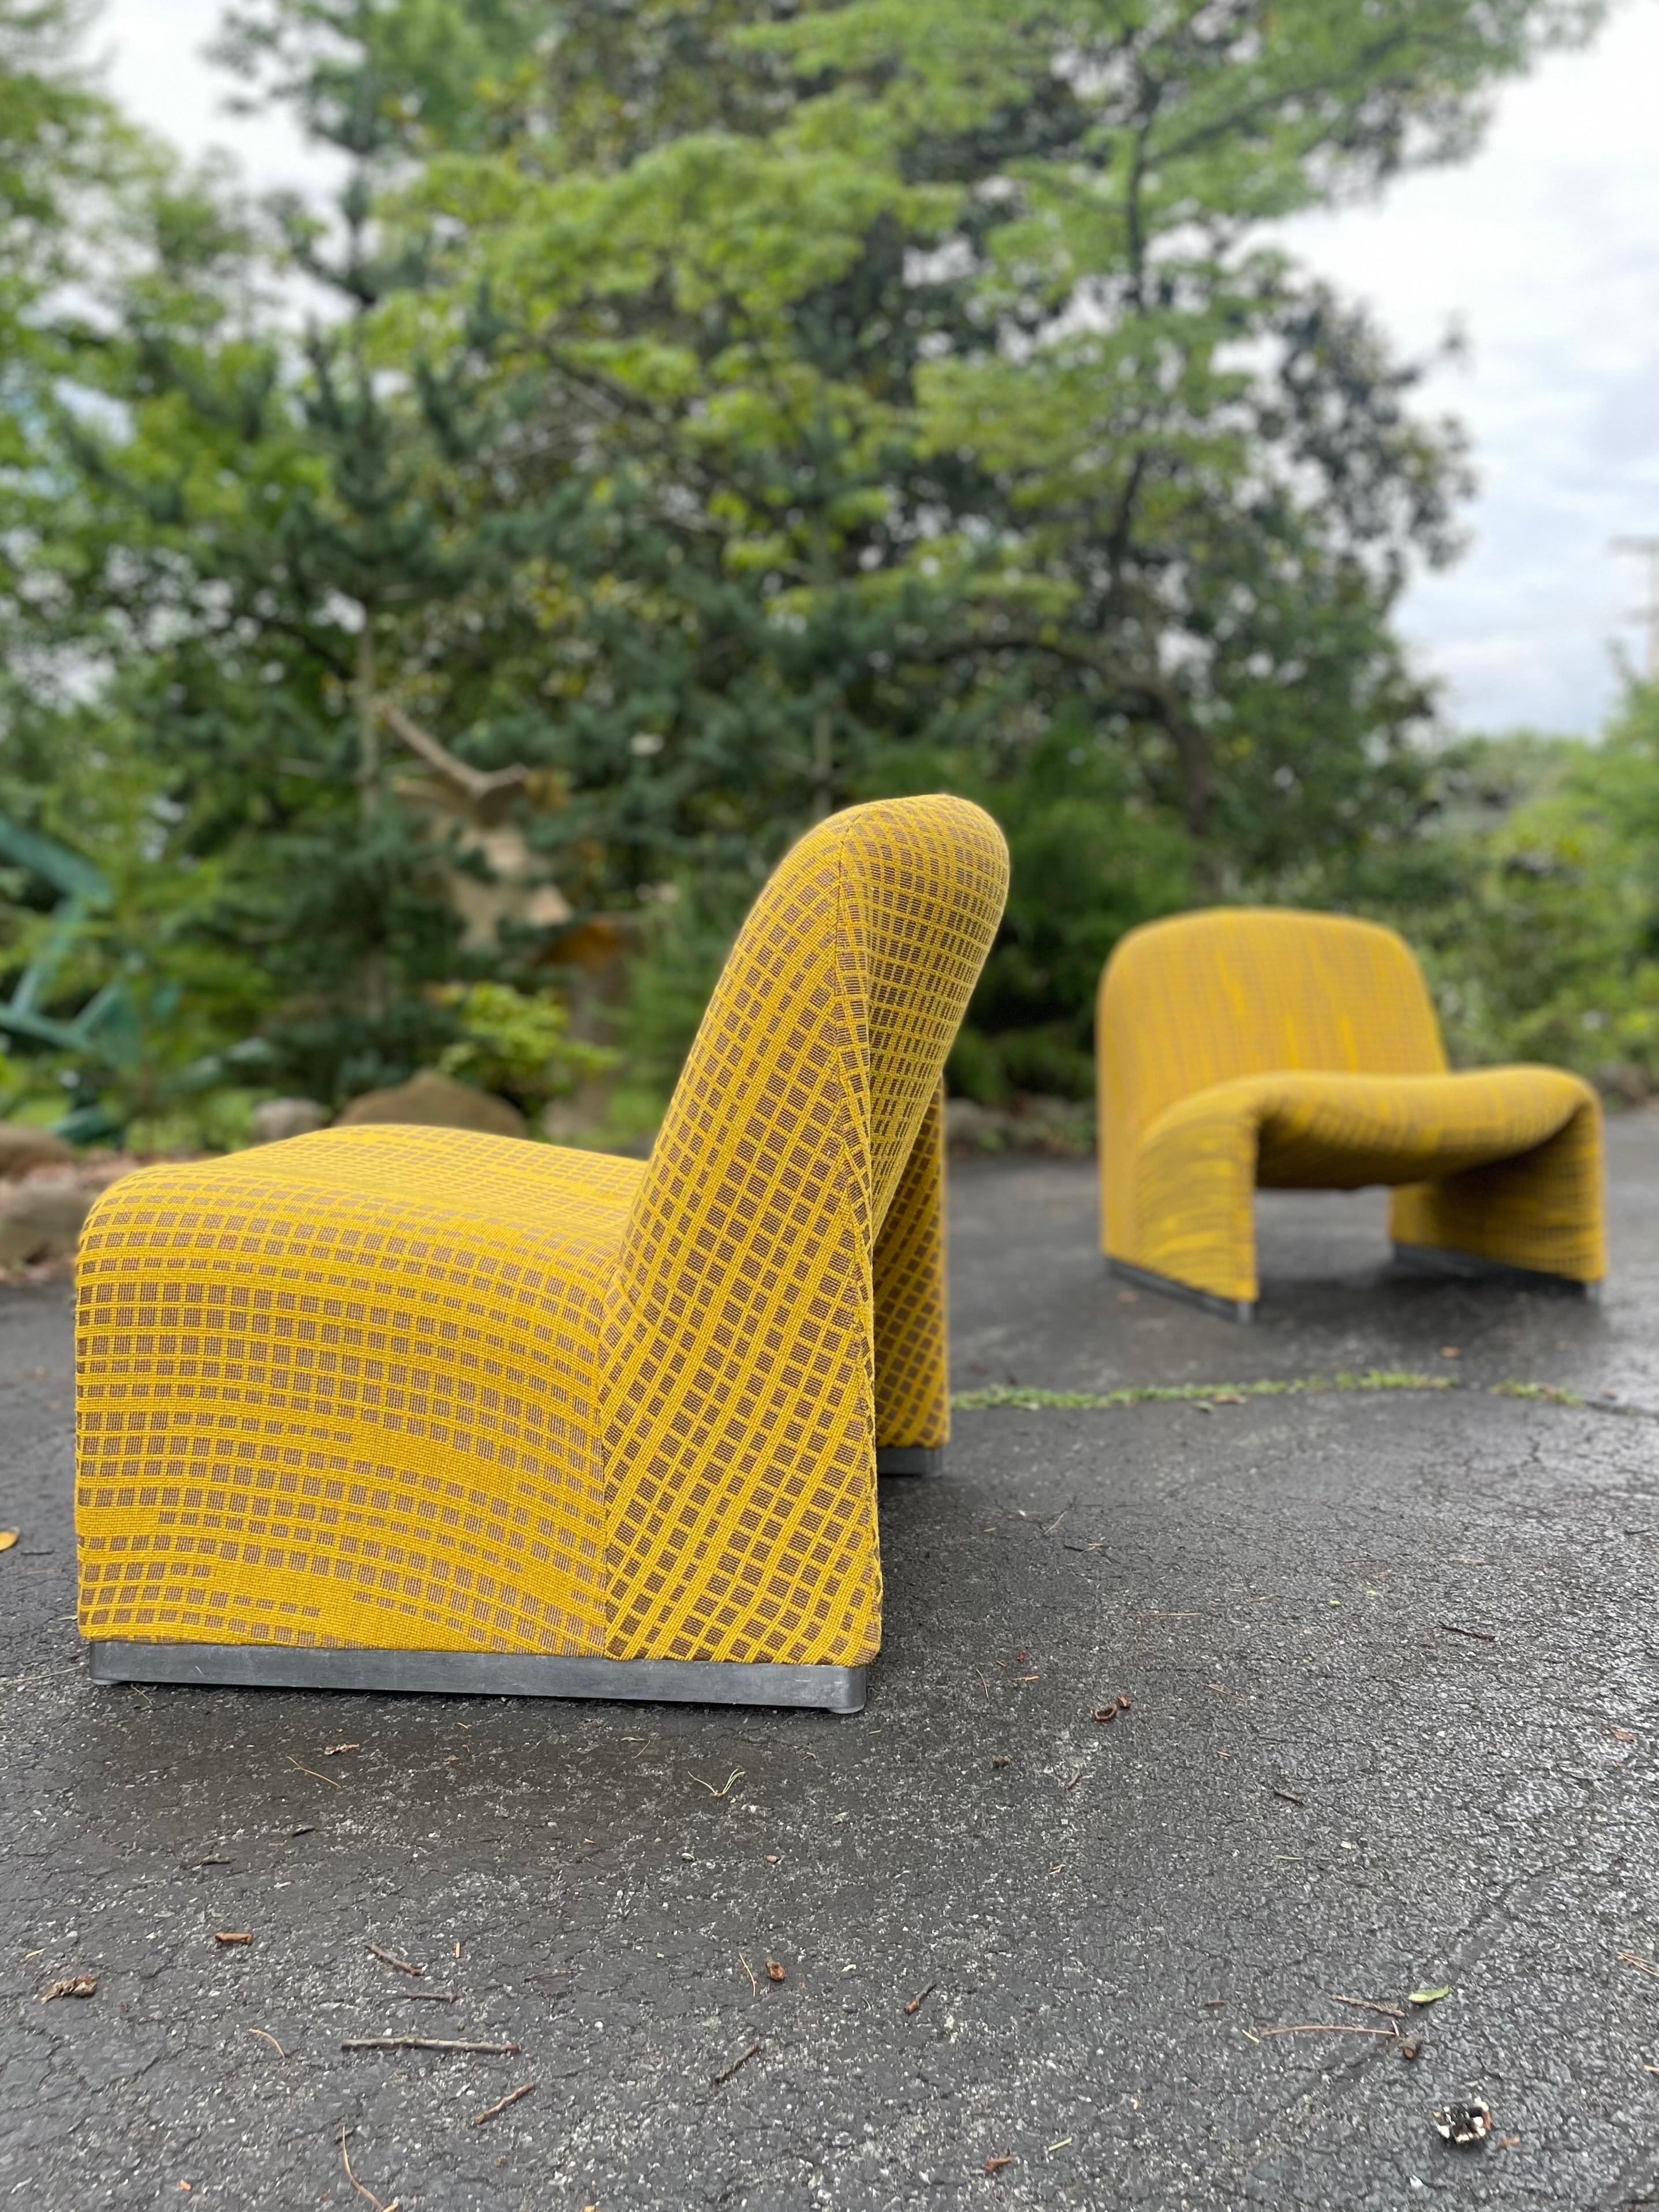 1970s Italian Modern Alky Chairs Alky by Giancarlo Piretti, a Pair For Sale 6